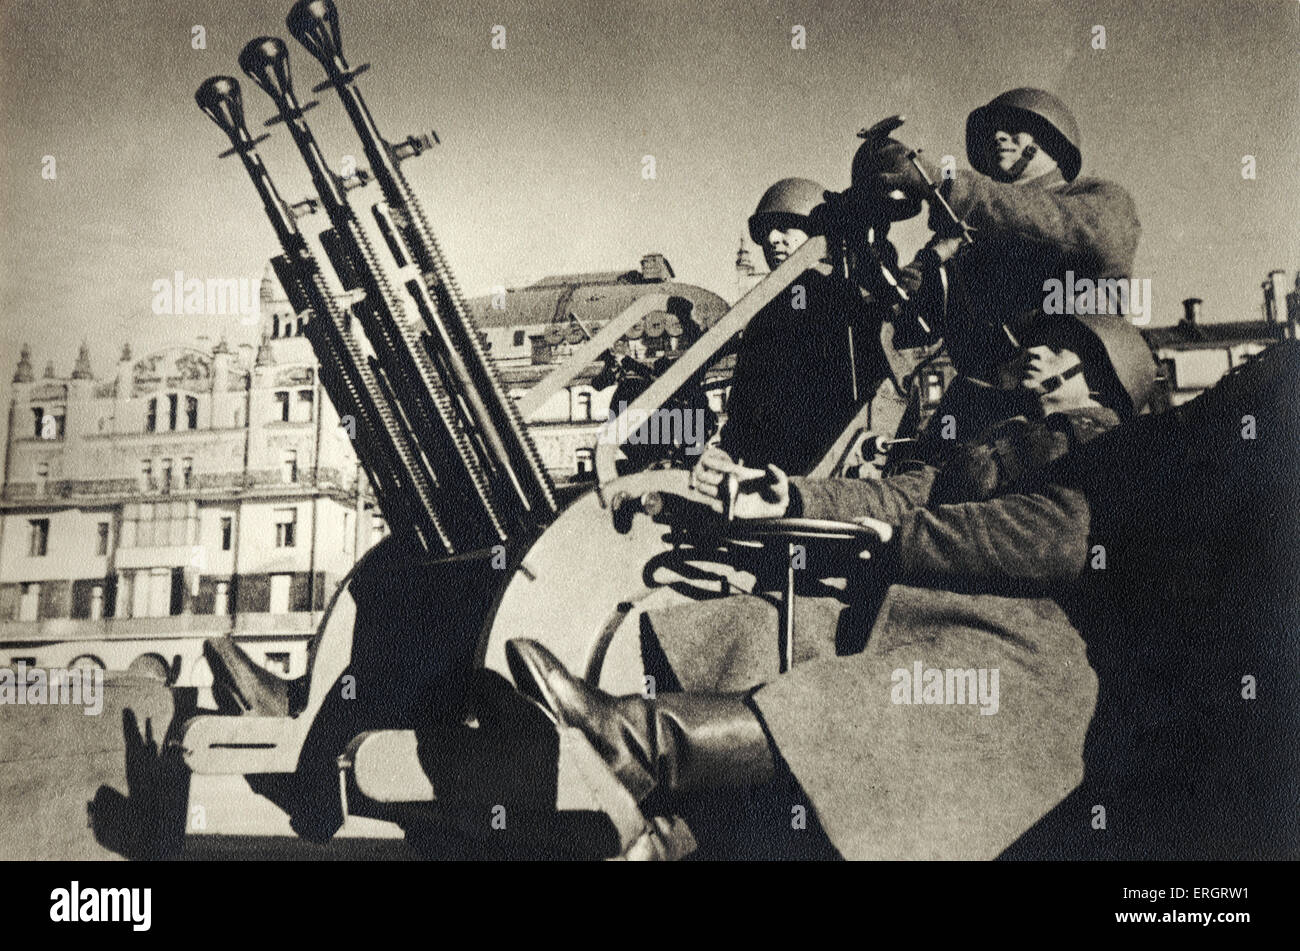 Anti-aircraft station in the centre of Moscow 1941 - during World War II Prokofiev Shostakovich background.  Schostakowitsch Stock Photo